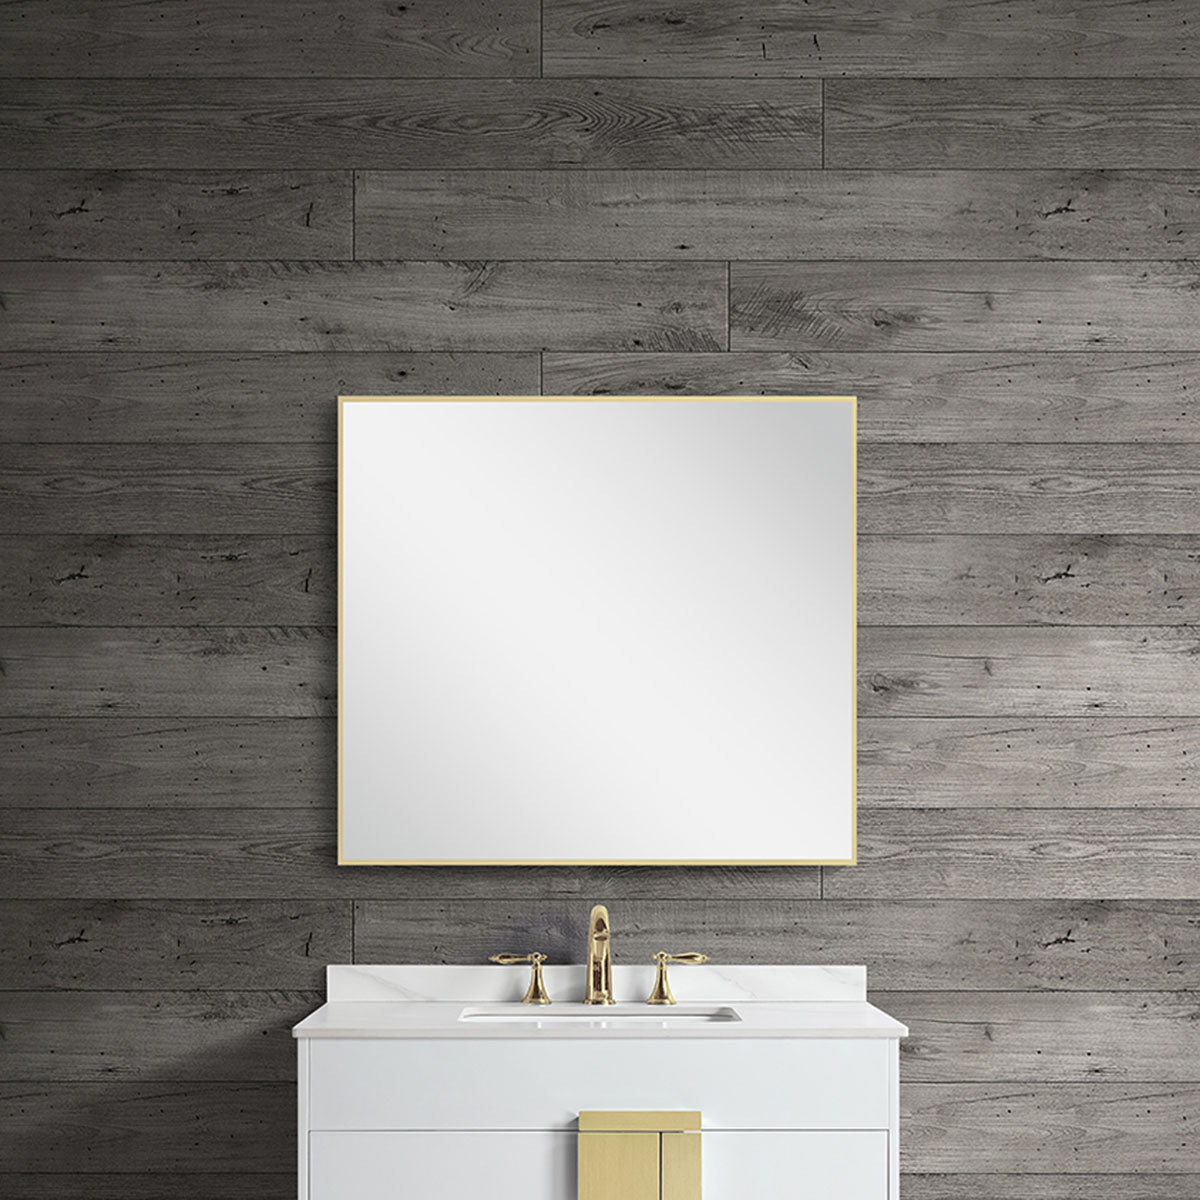 36"w x 32"h Aluminum Rectangle Bathroom Wall Mirror (Brushed Gold) - iStyle Bath